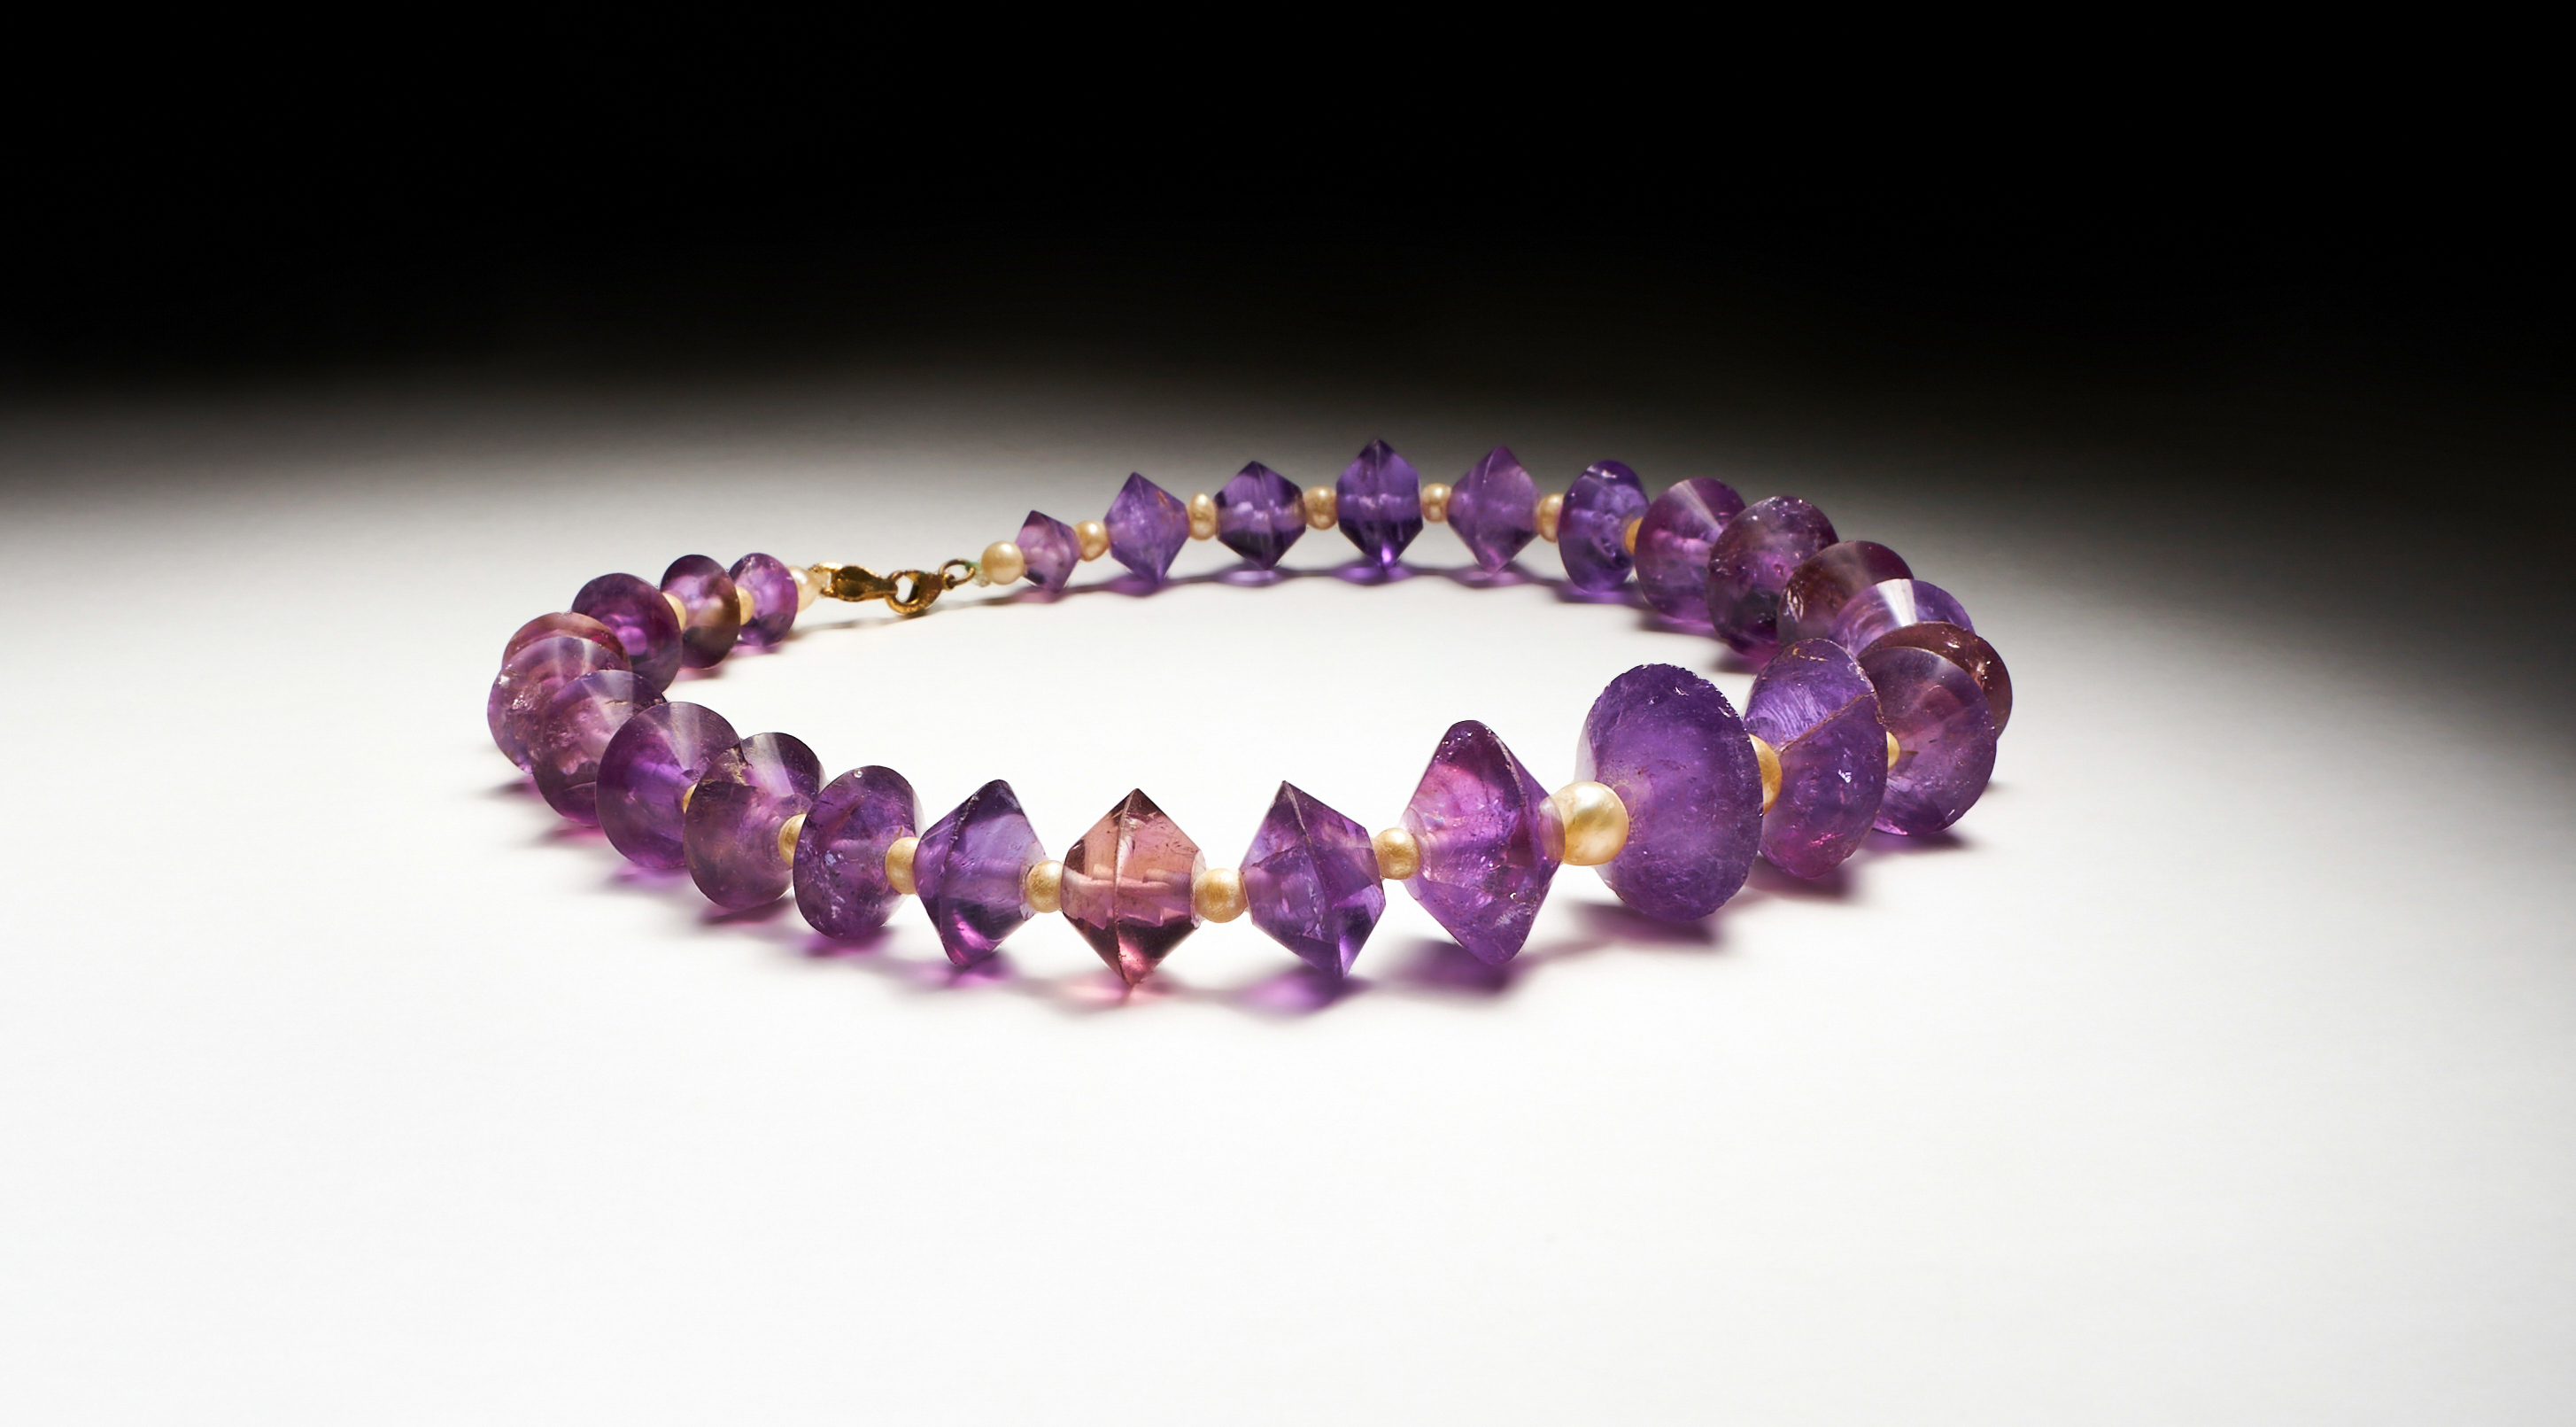 A ROMAN GOLD, AMETHYST & PEARL BEAD NECKLACE CIRCA 1ST CENTURY B.C.-1ST CENTURY A.D. - Image 4 of 5